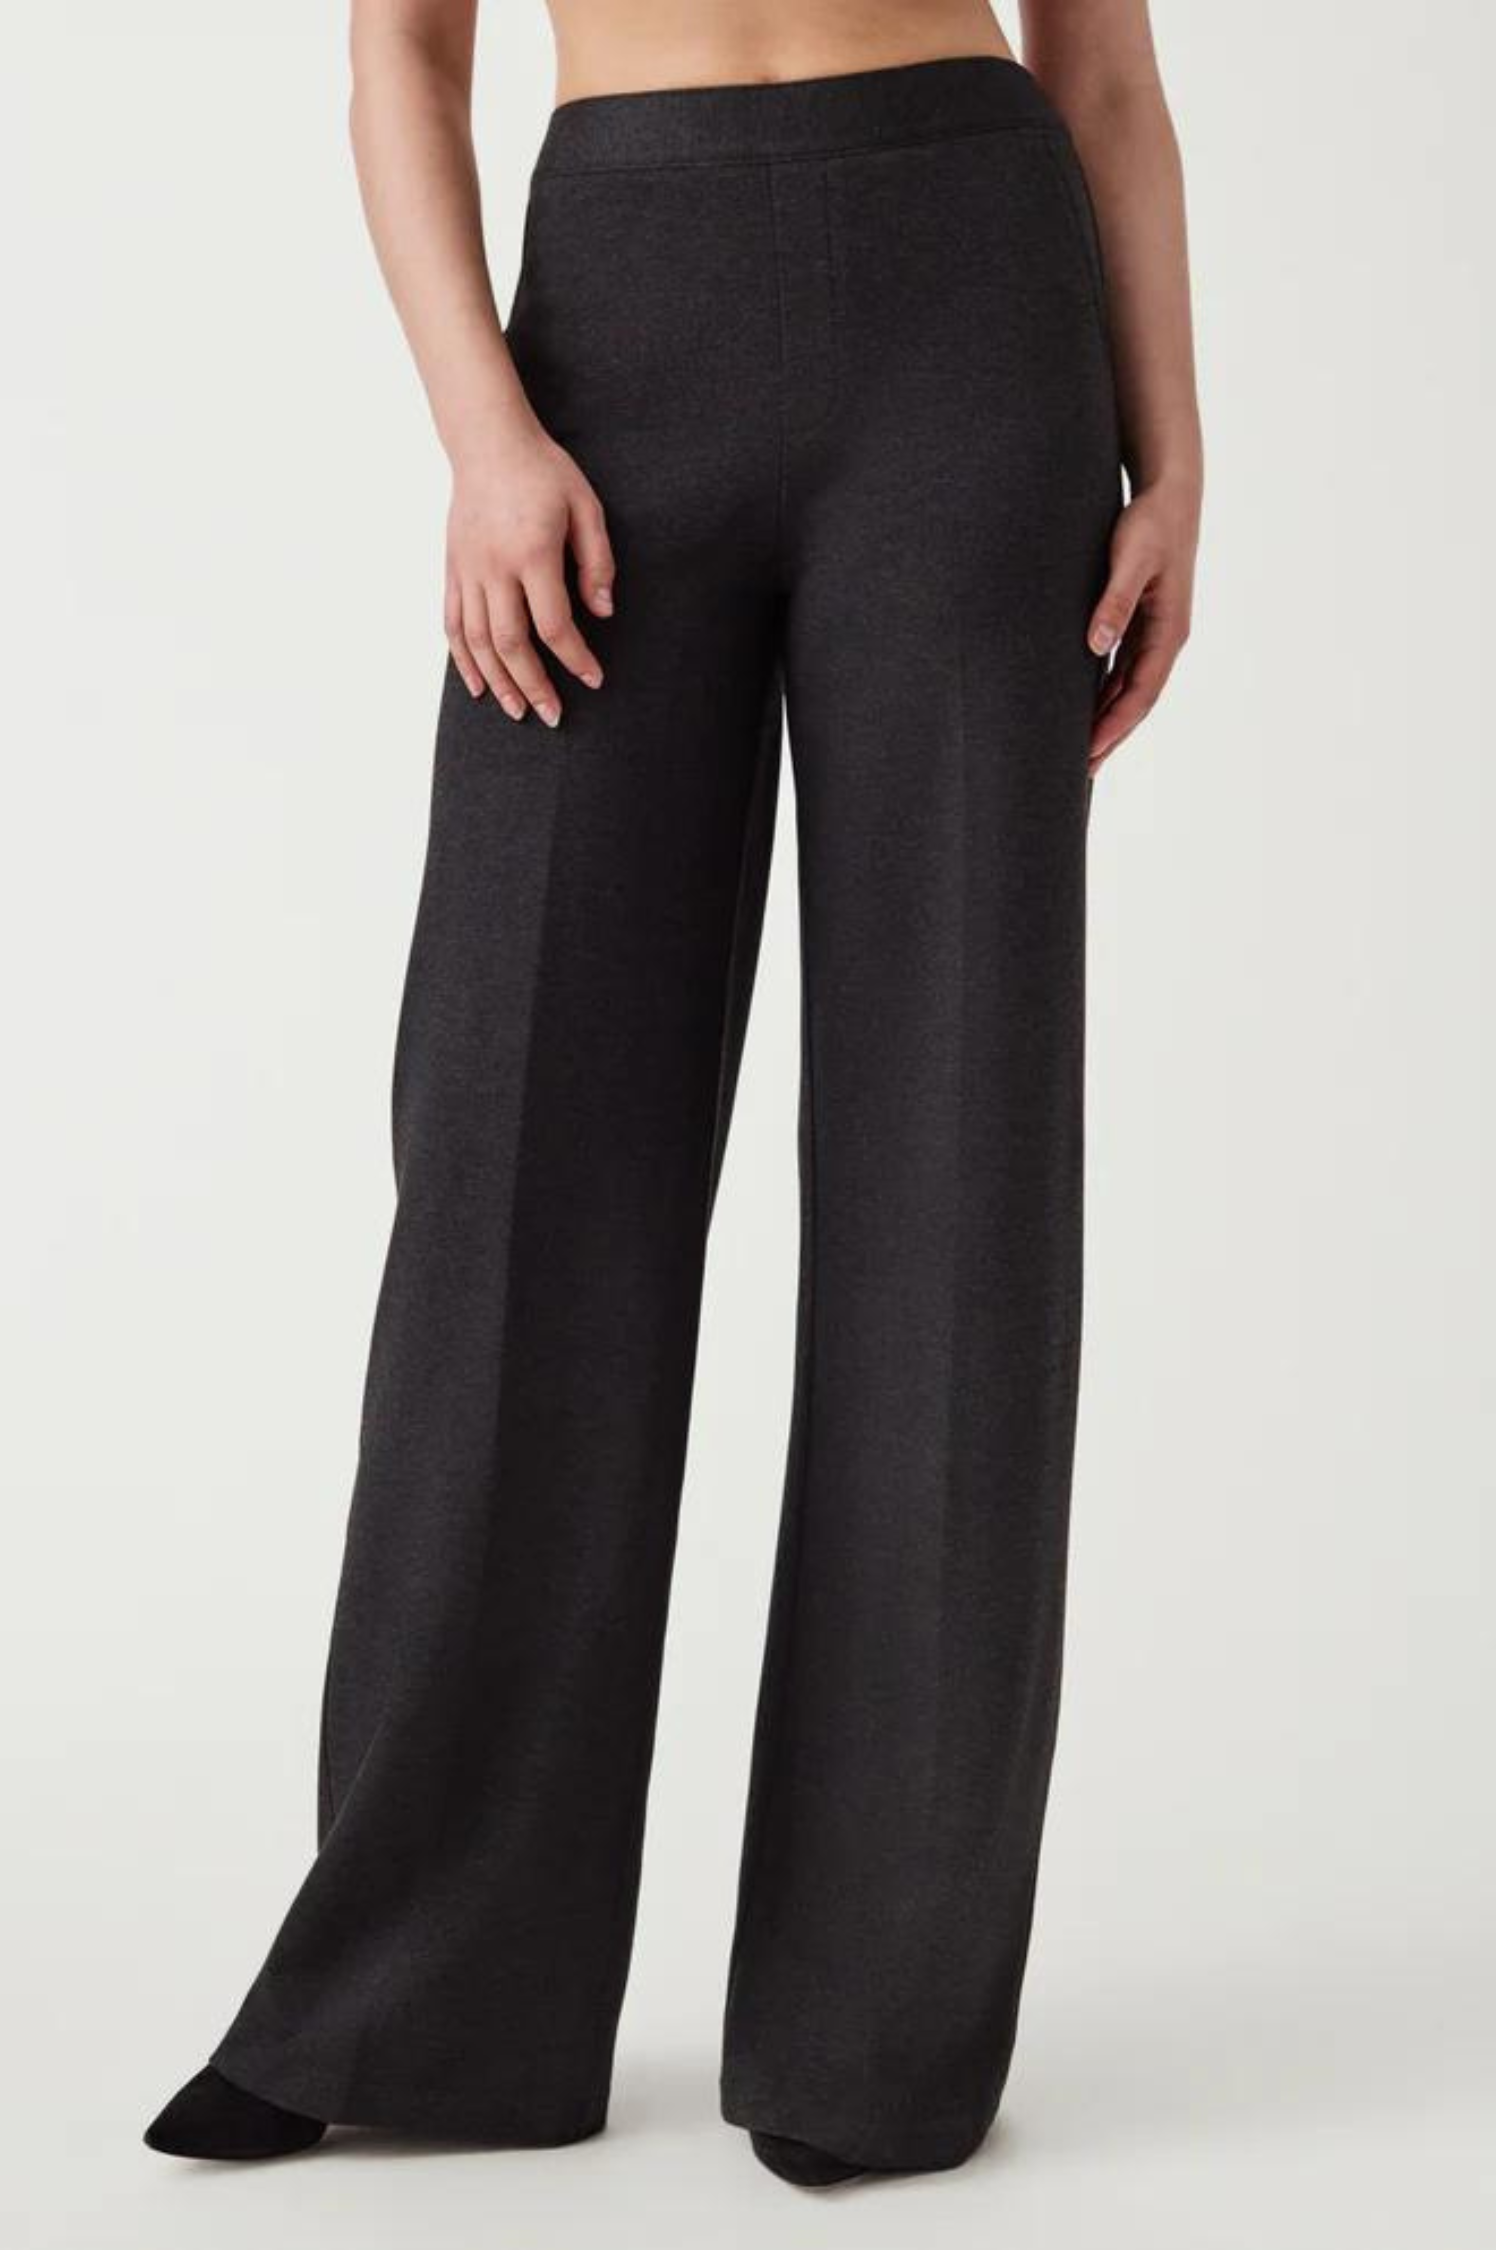 The Perfect Pant- Wide Leg